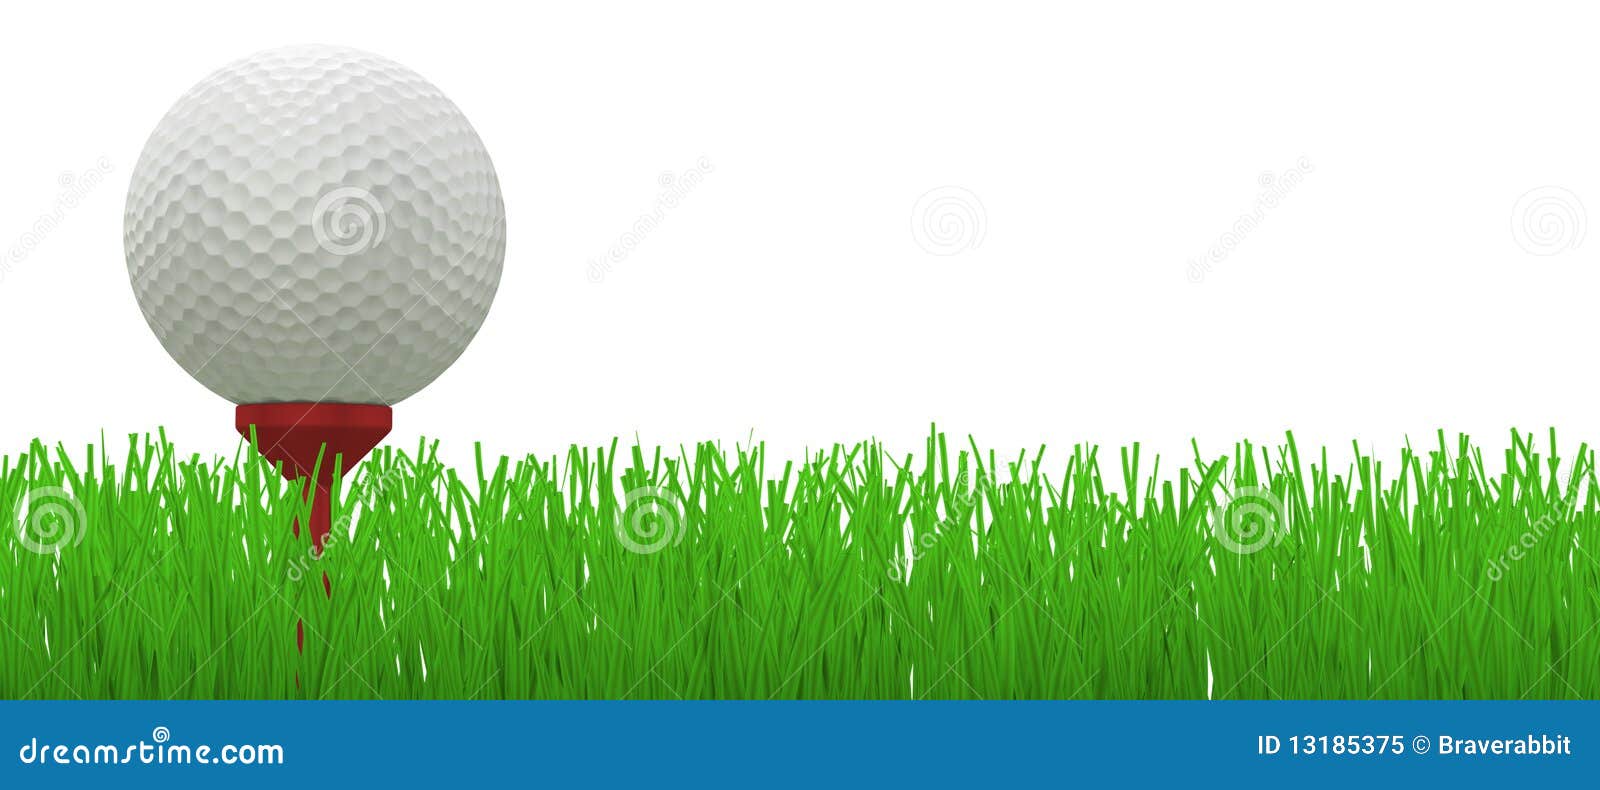 golf ball on red tee in grass -